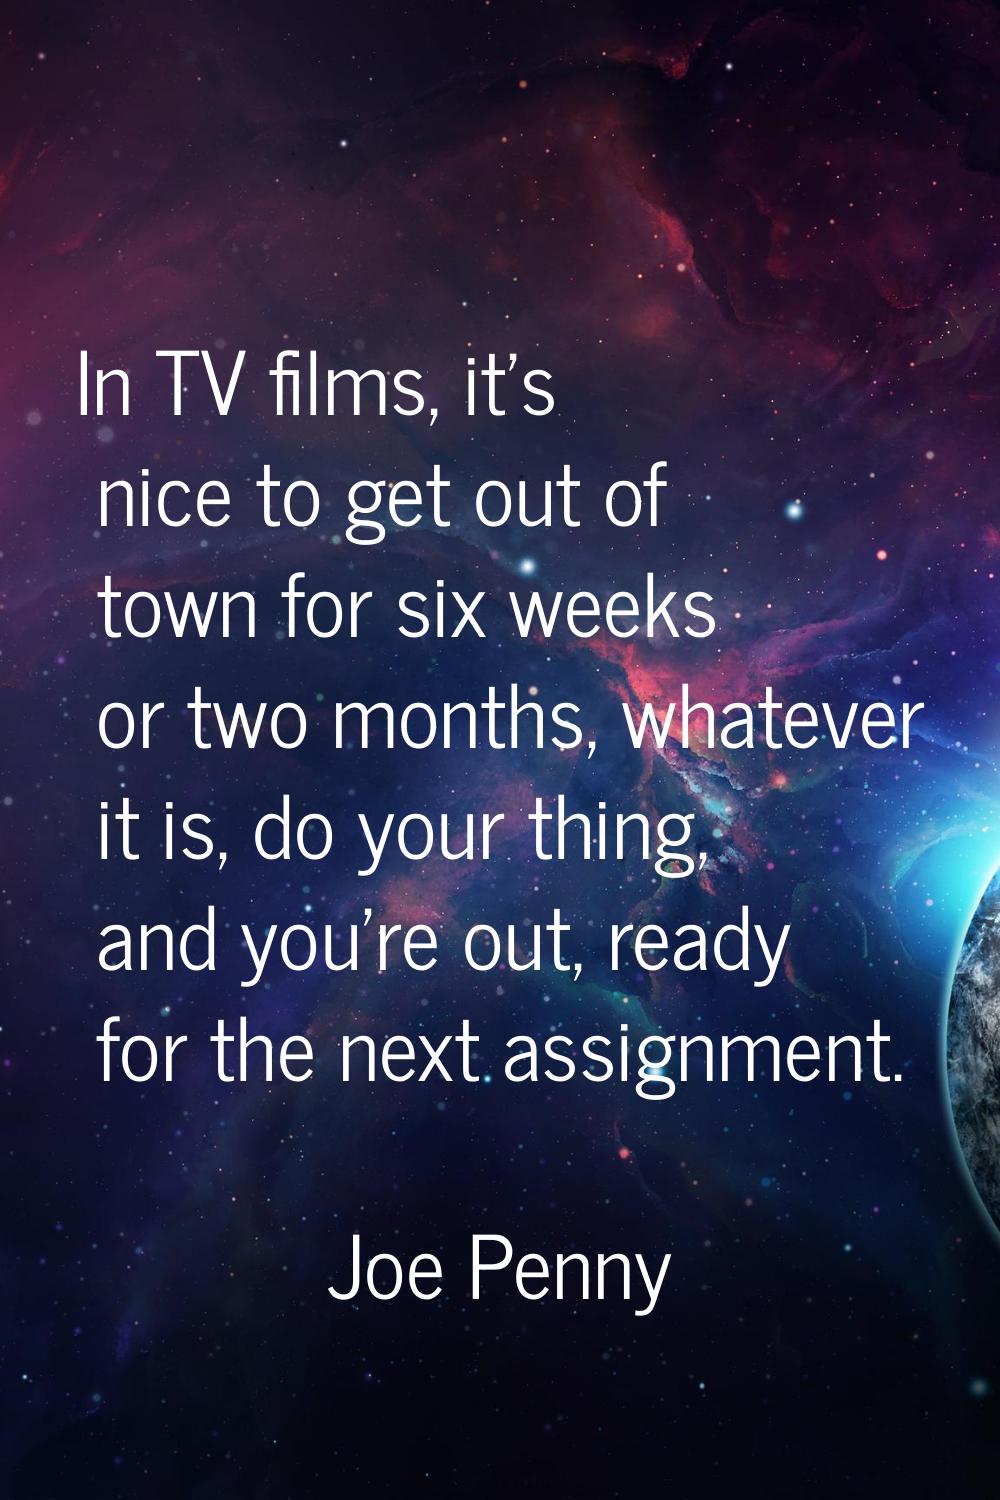 In TV films, it's nice to get out of town for six weeks or two months, whatever it is, do your thin